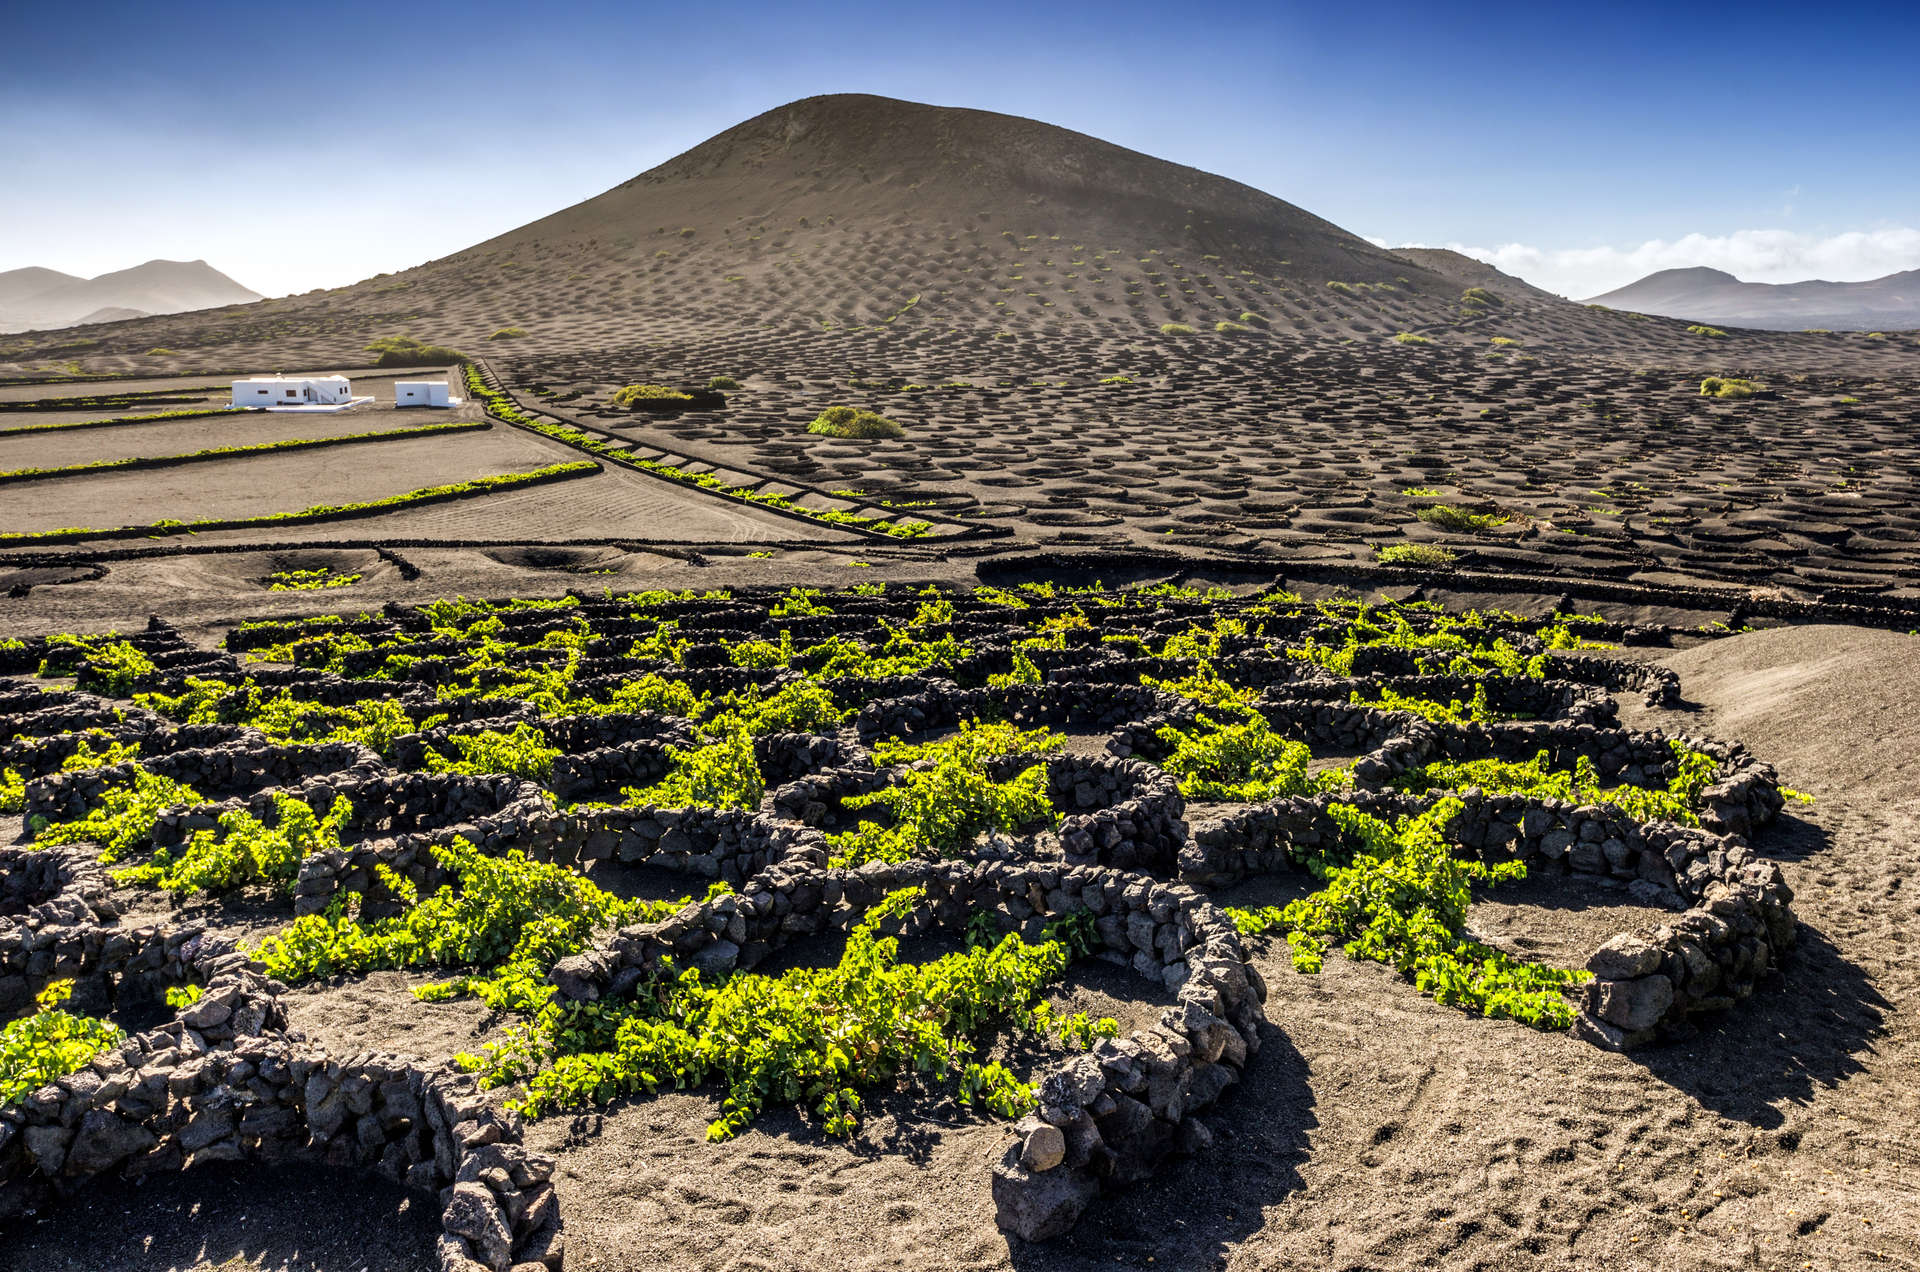 Lanzarote is famed for its volcanic white wines